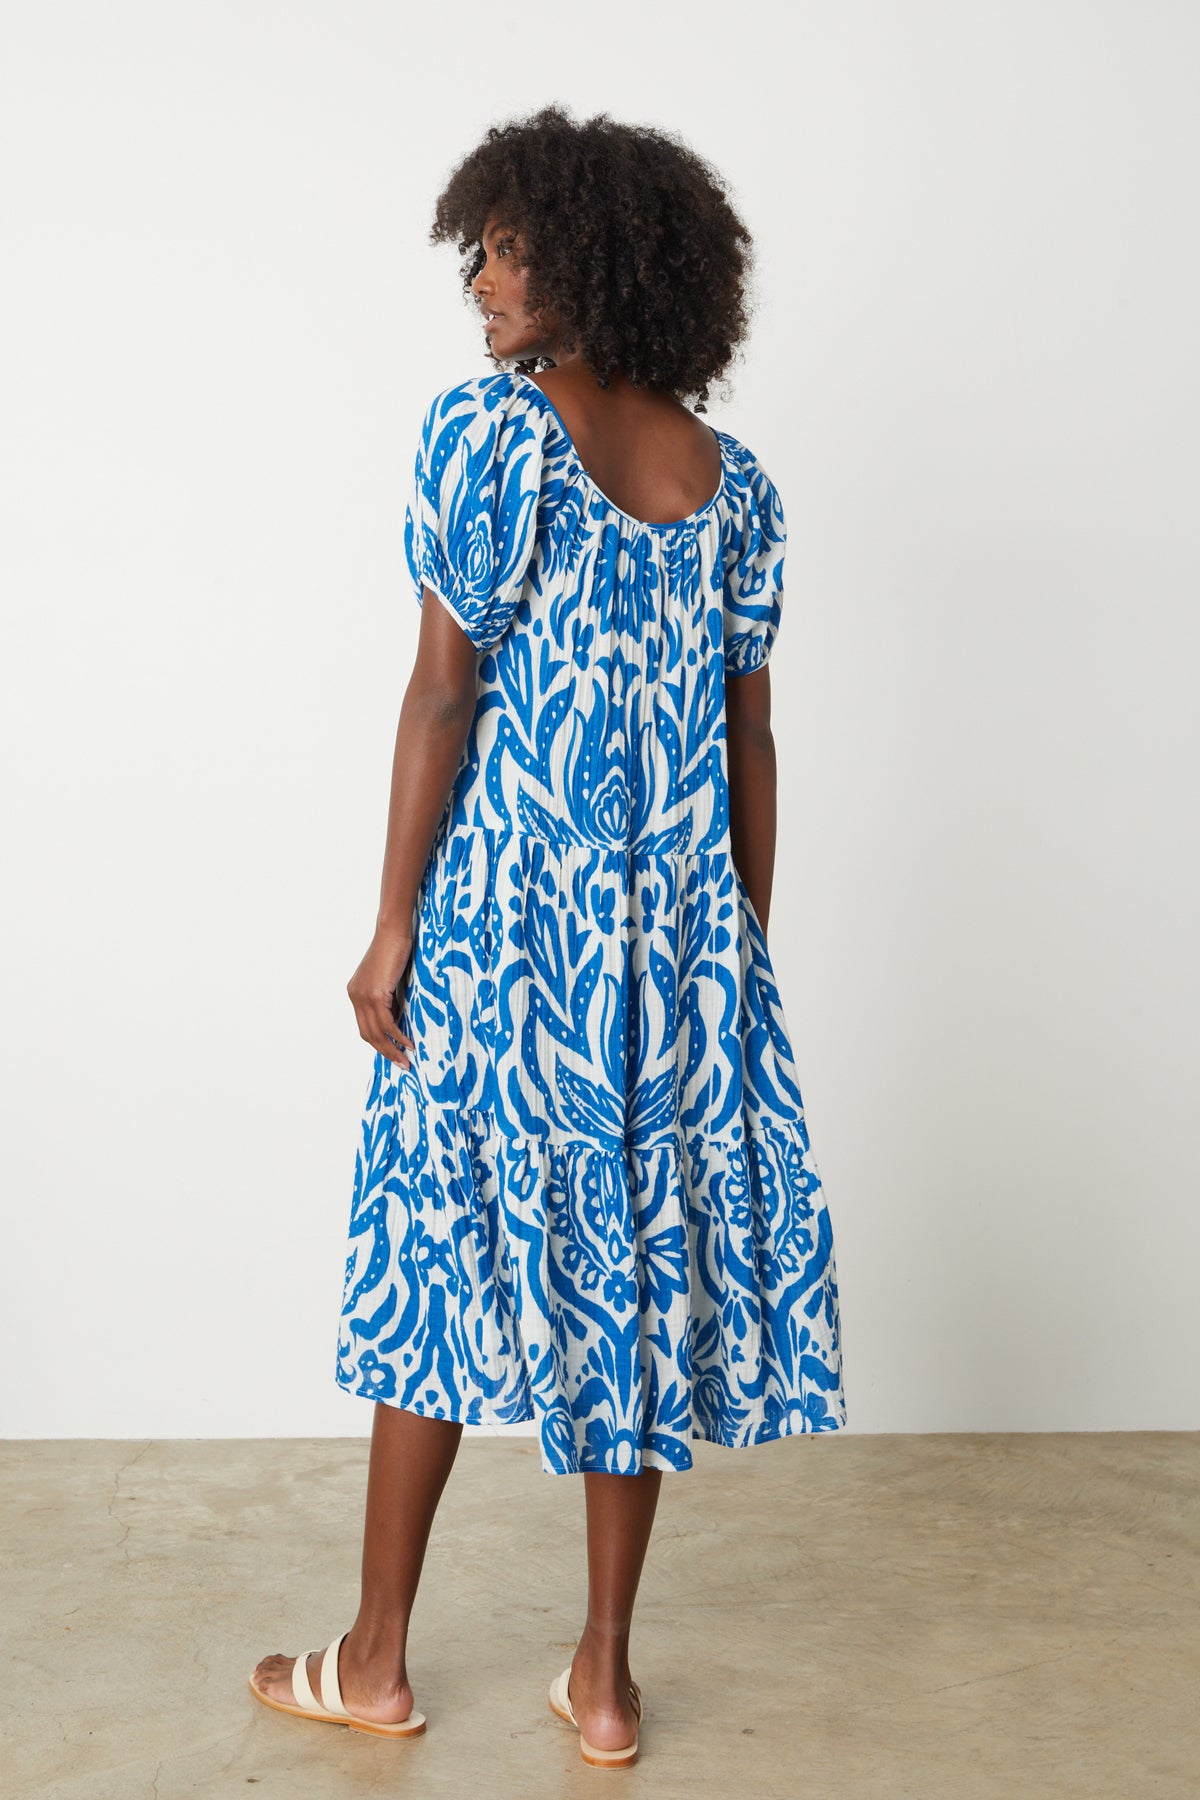 The back view of a woman wearing a Velvet by Graham & Spencer Madilyn Printed Cotton Gauze Midi Dress.-35205229052097